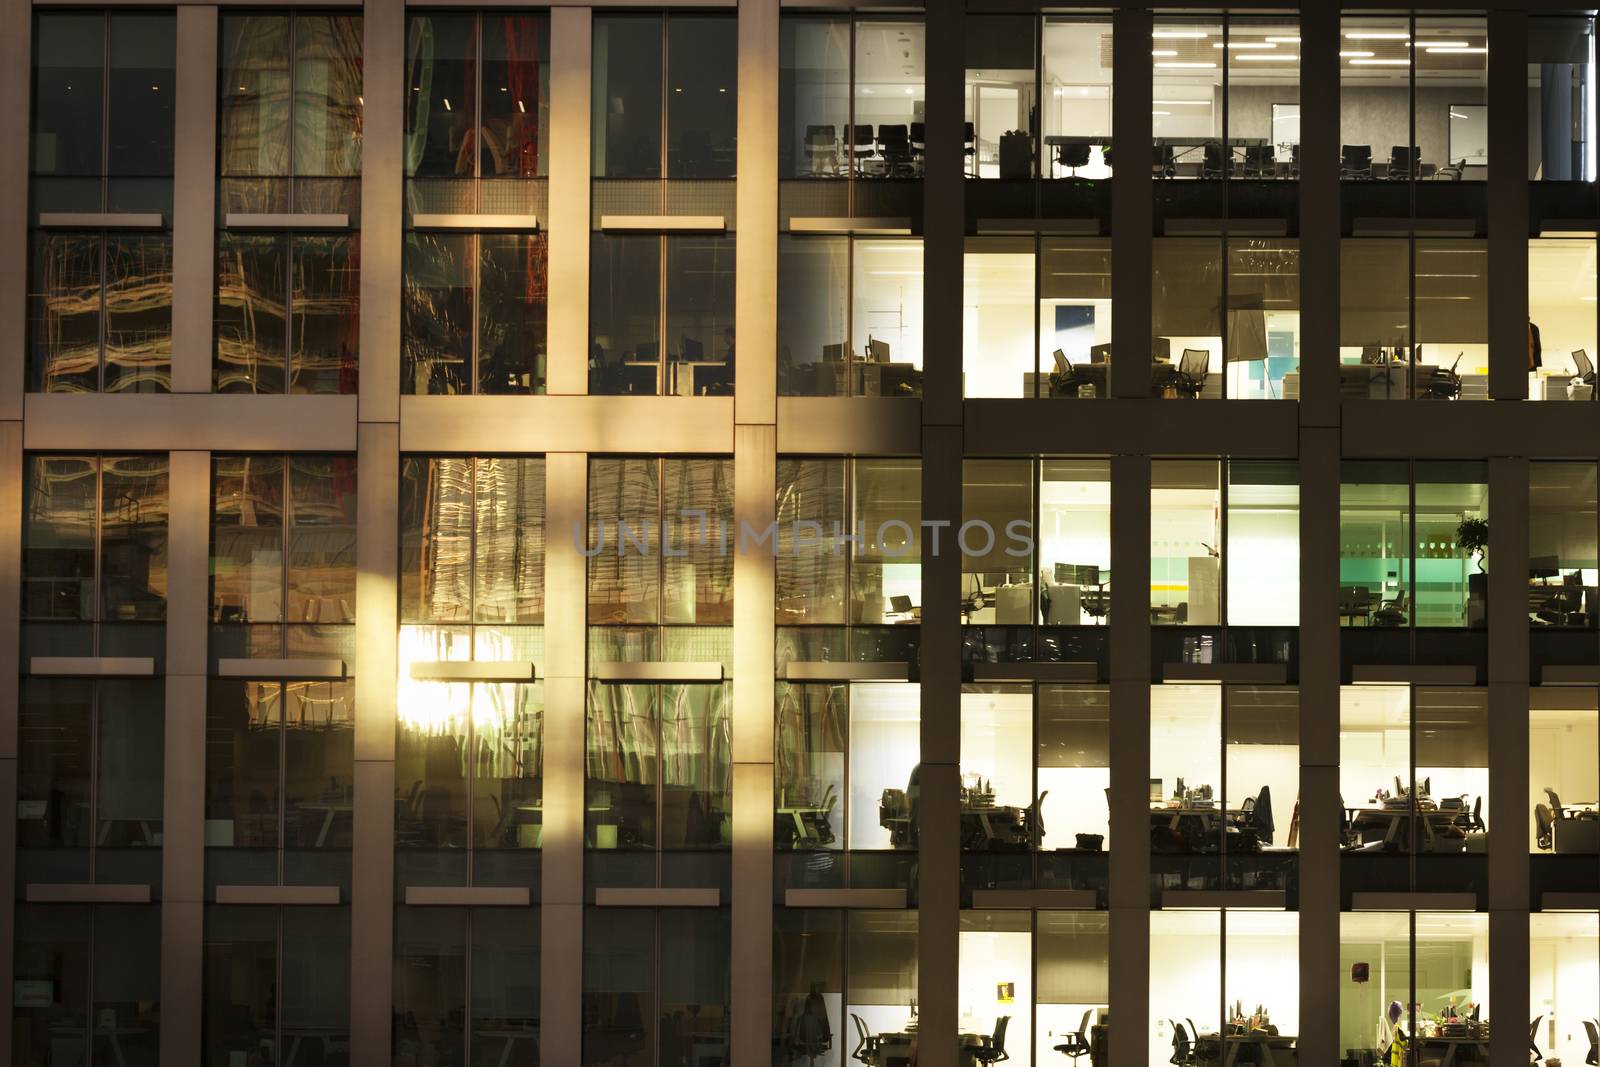 A composite image of an office scene fading from day to night time.